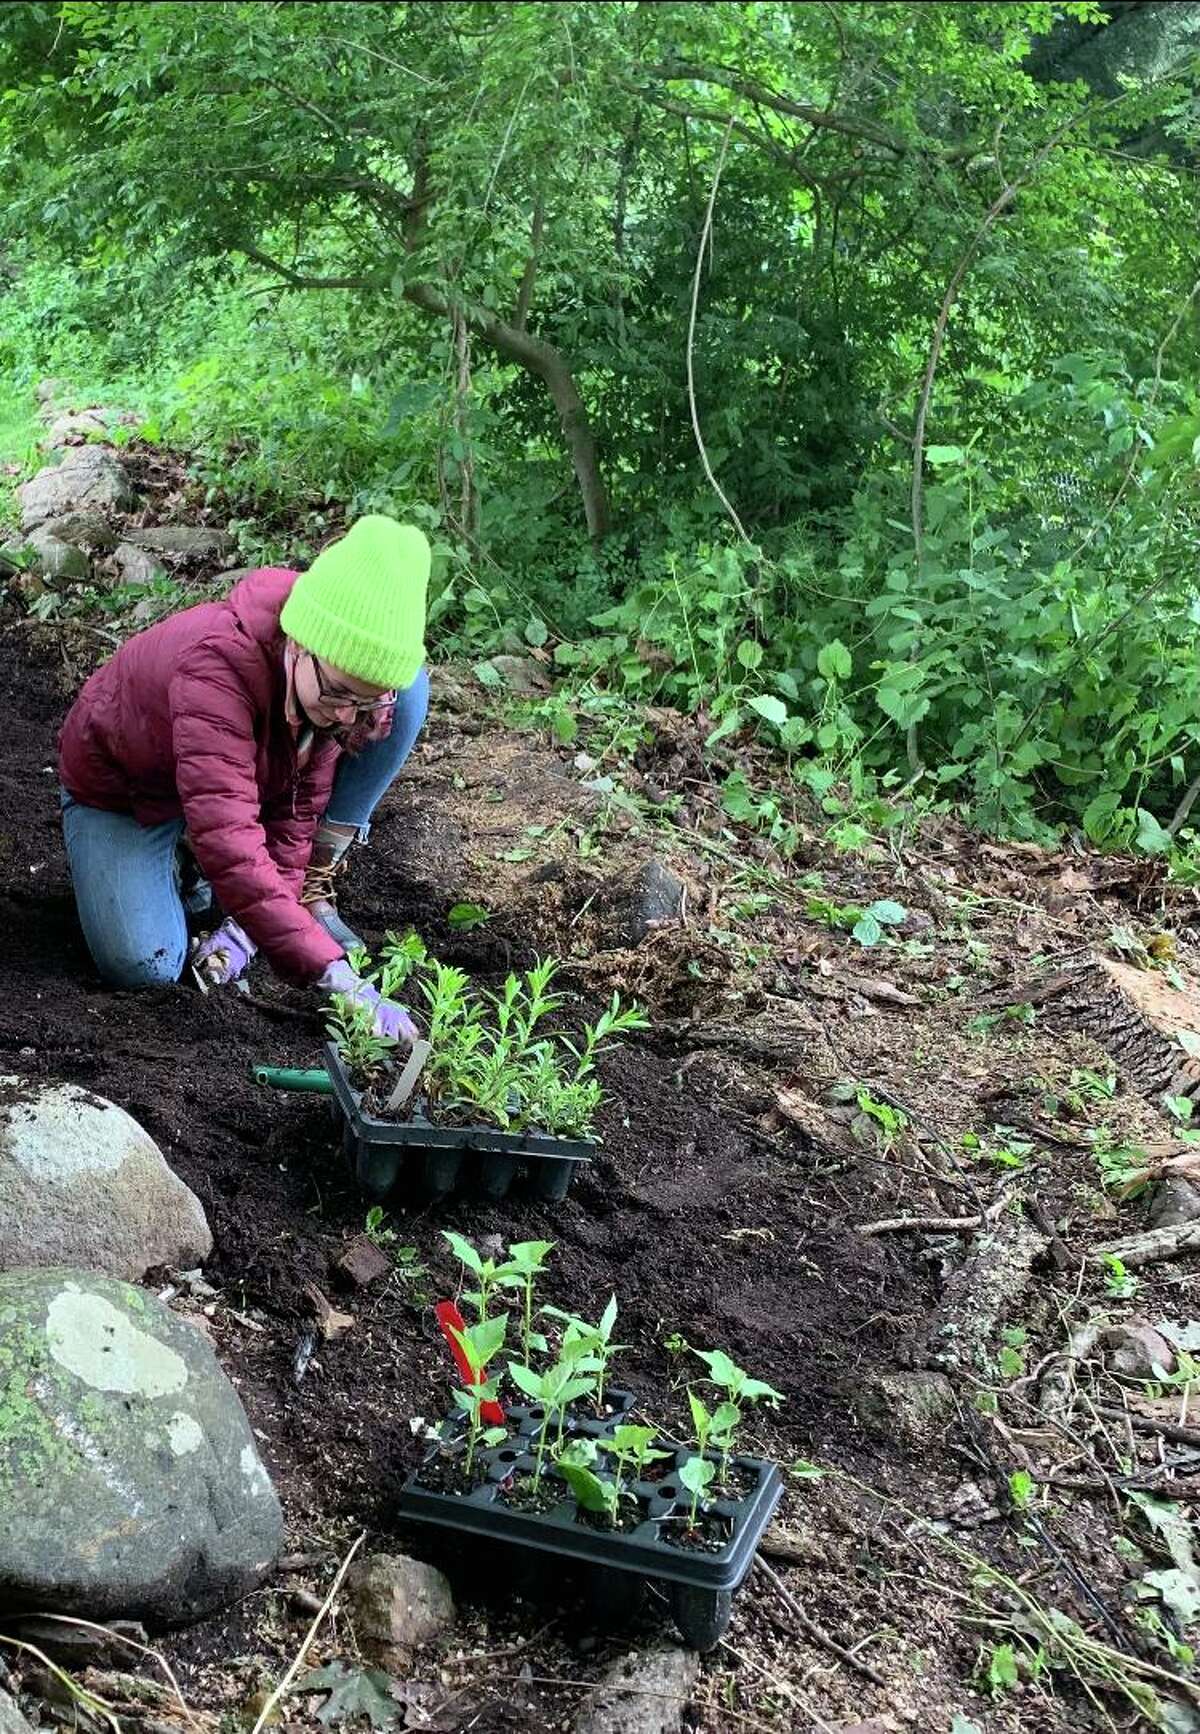 Sofia Schaffer wrote a book aimed at educating suburban homeowners on how to positively impact the health of the local ecosystem by sowing native plants in their private landscapes. Pictured is Schaffer doing some gardening in her backyard in Ridgefield.